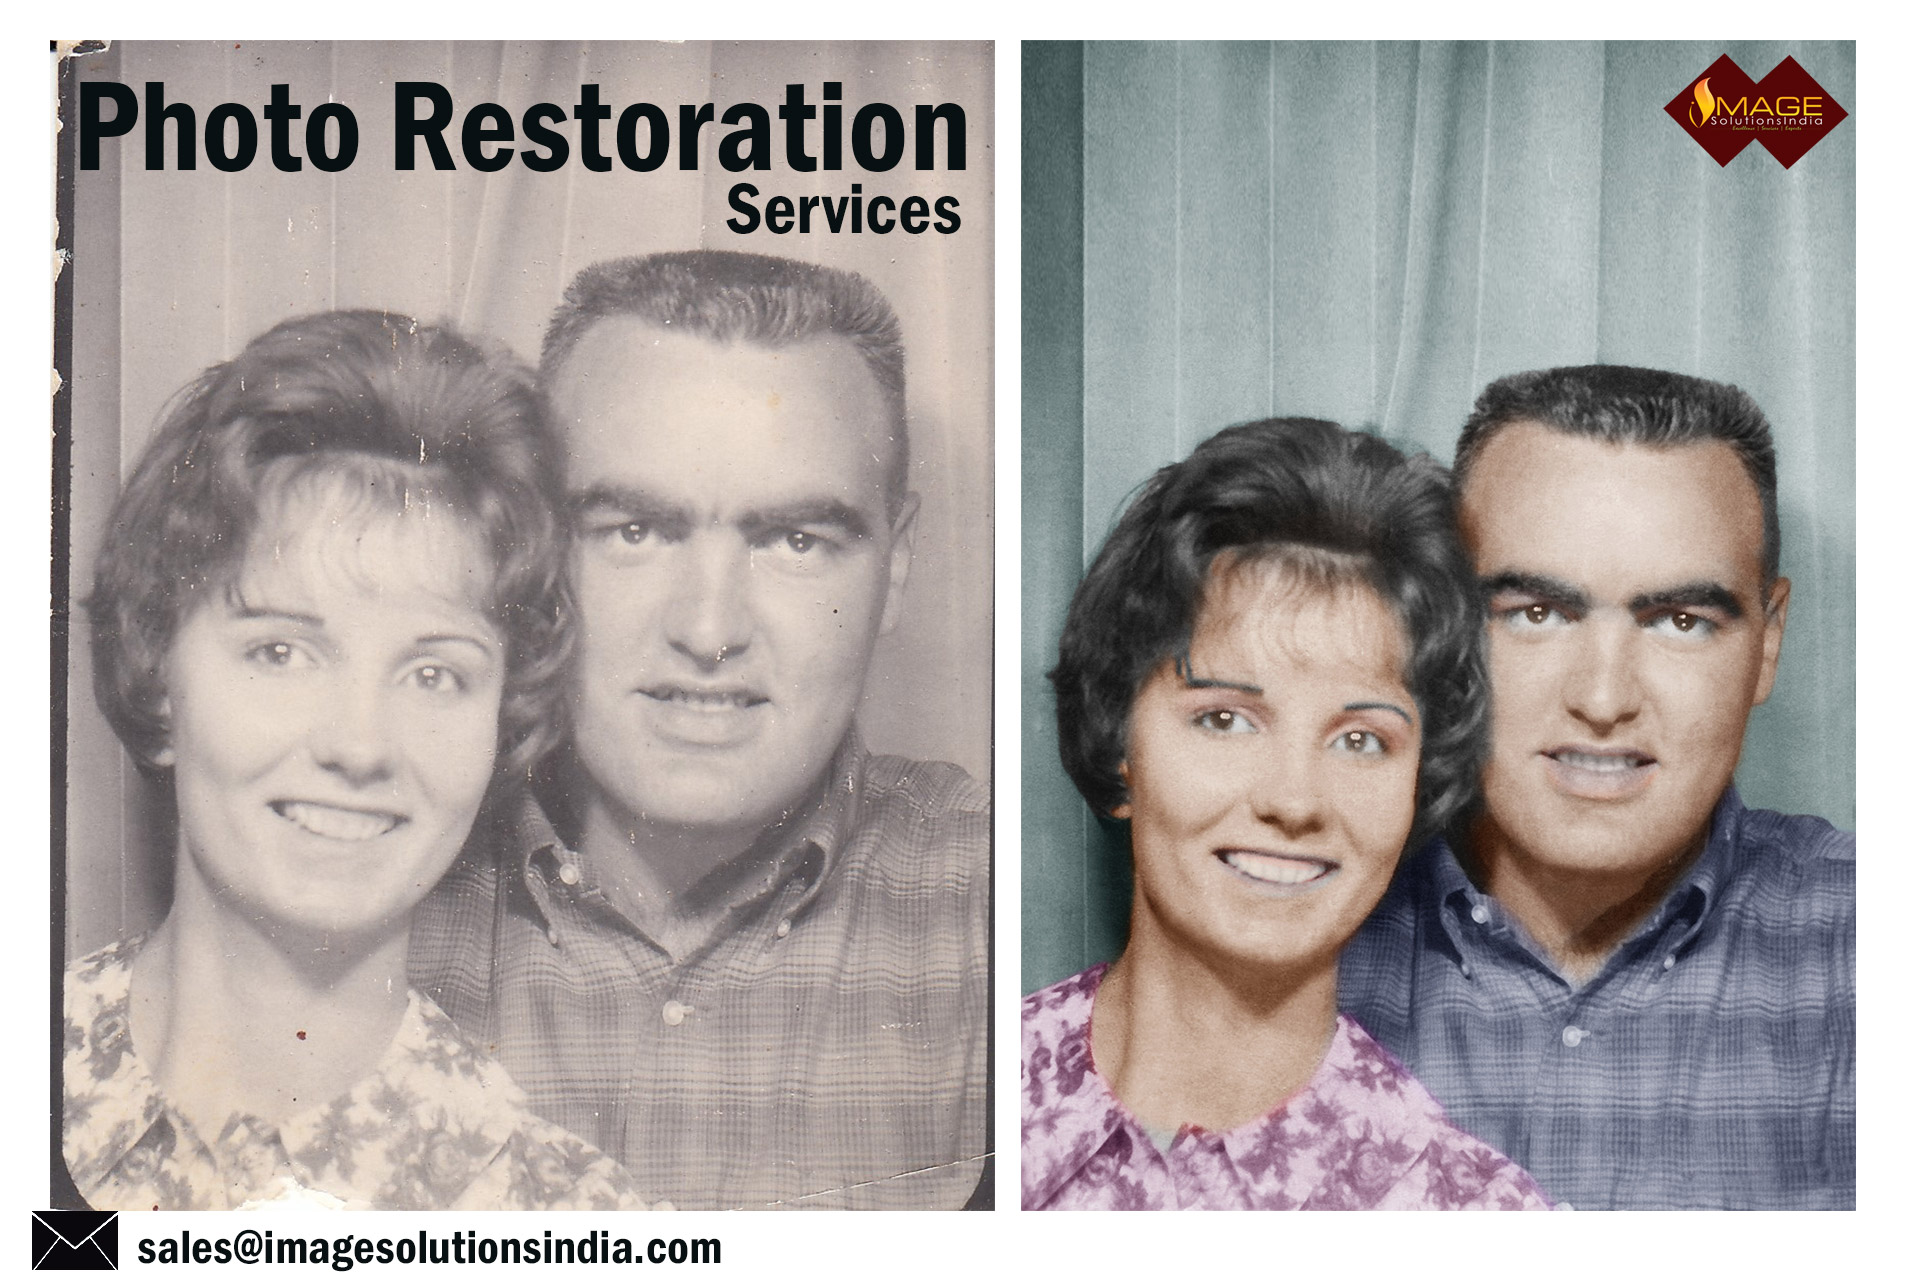 Photo Restoration Services to your old photos